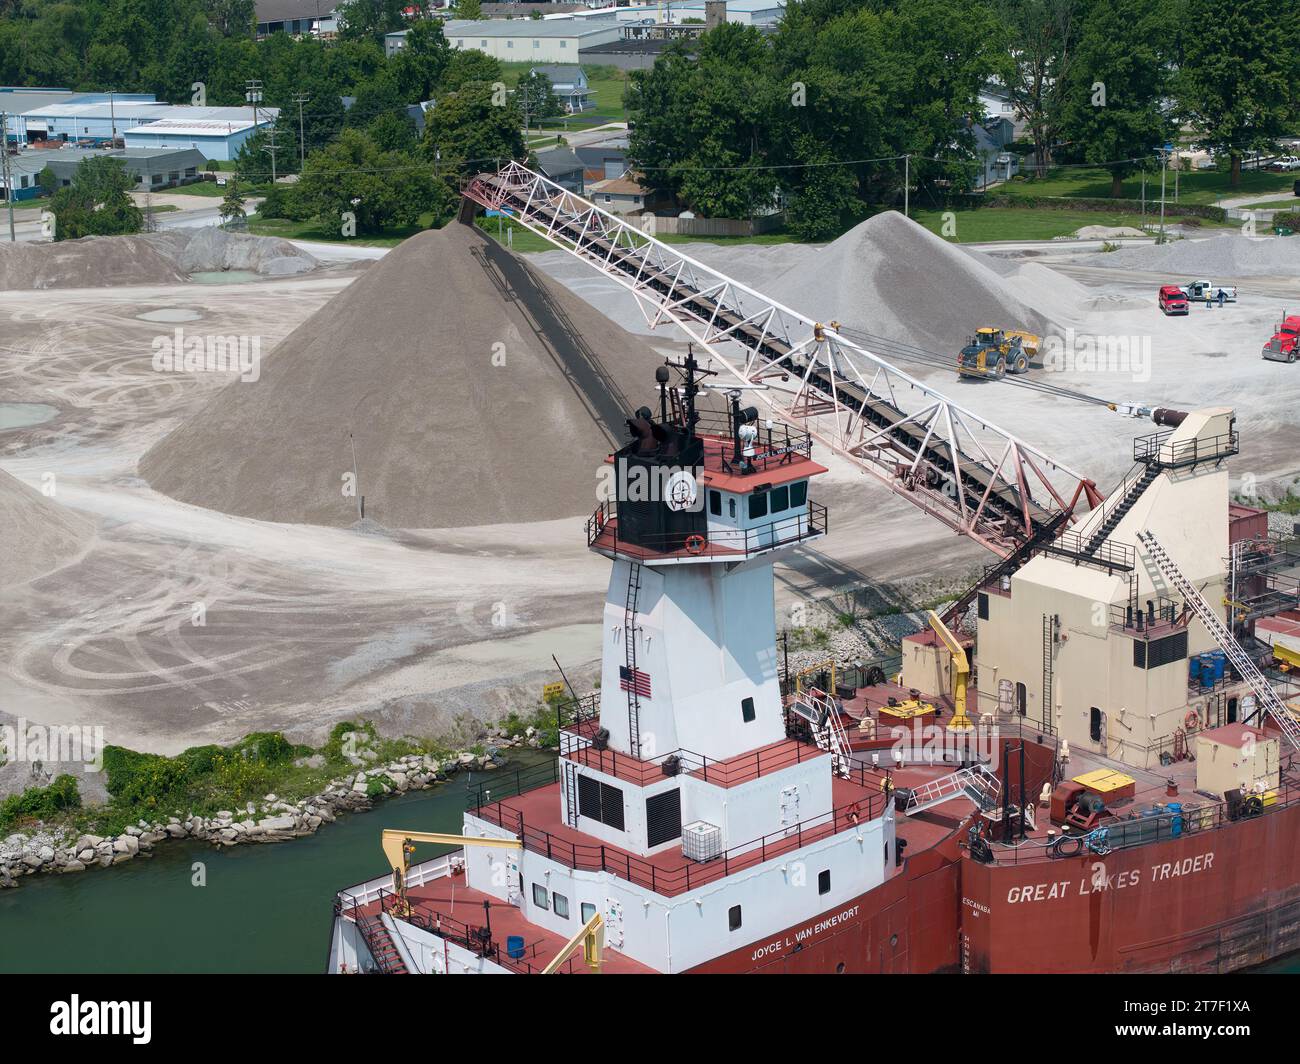 Pusher Tug Joyce L. VanEnkevort and Great Lakes Trader barge off-loading aggregate, St. Clair River, Marine City, Michigan, USA Stock Photo